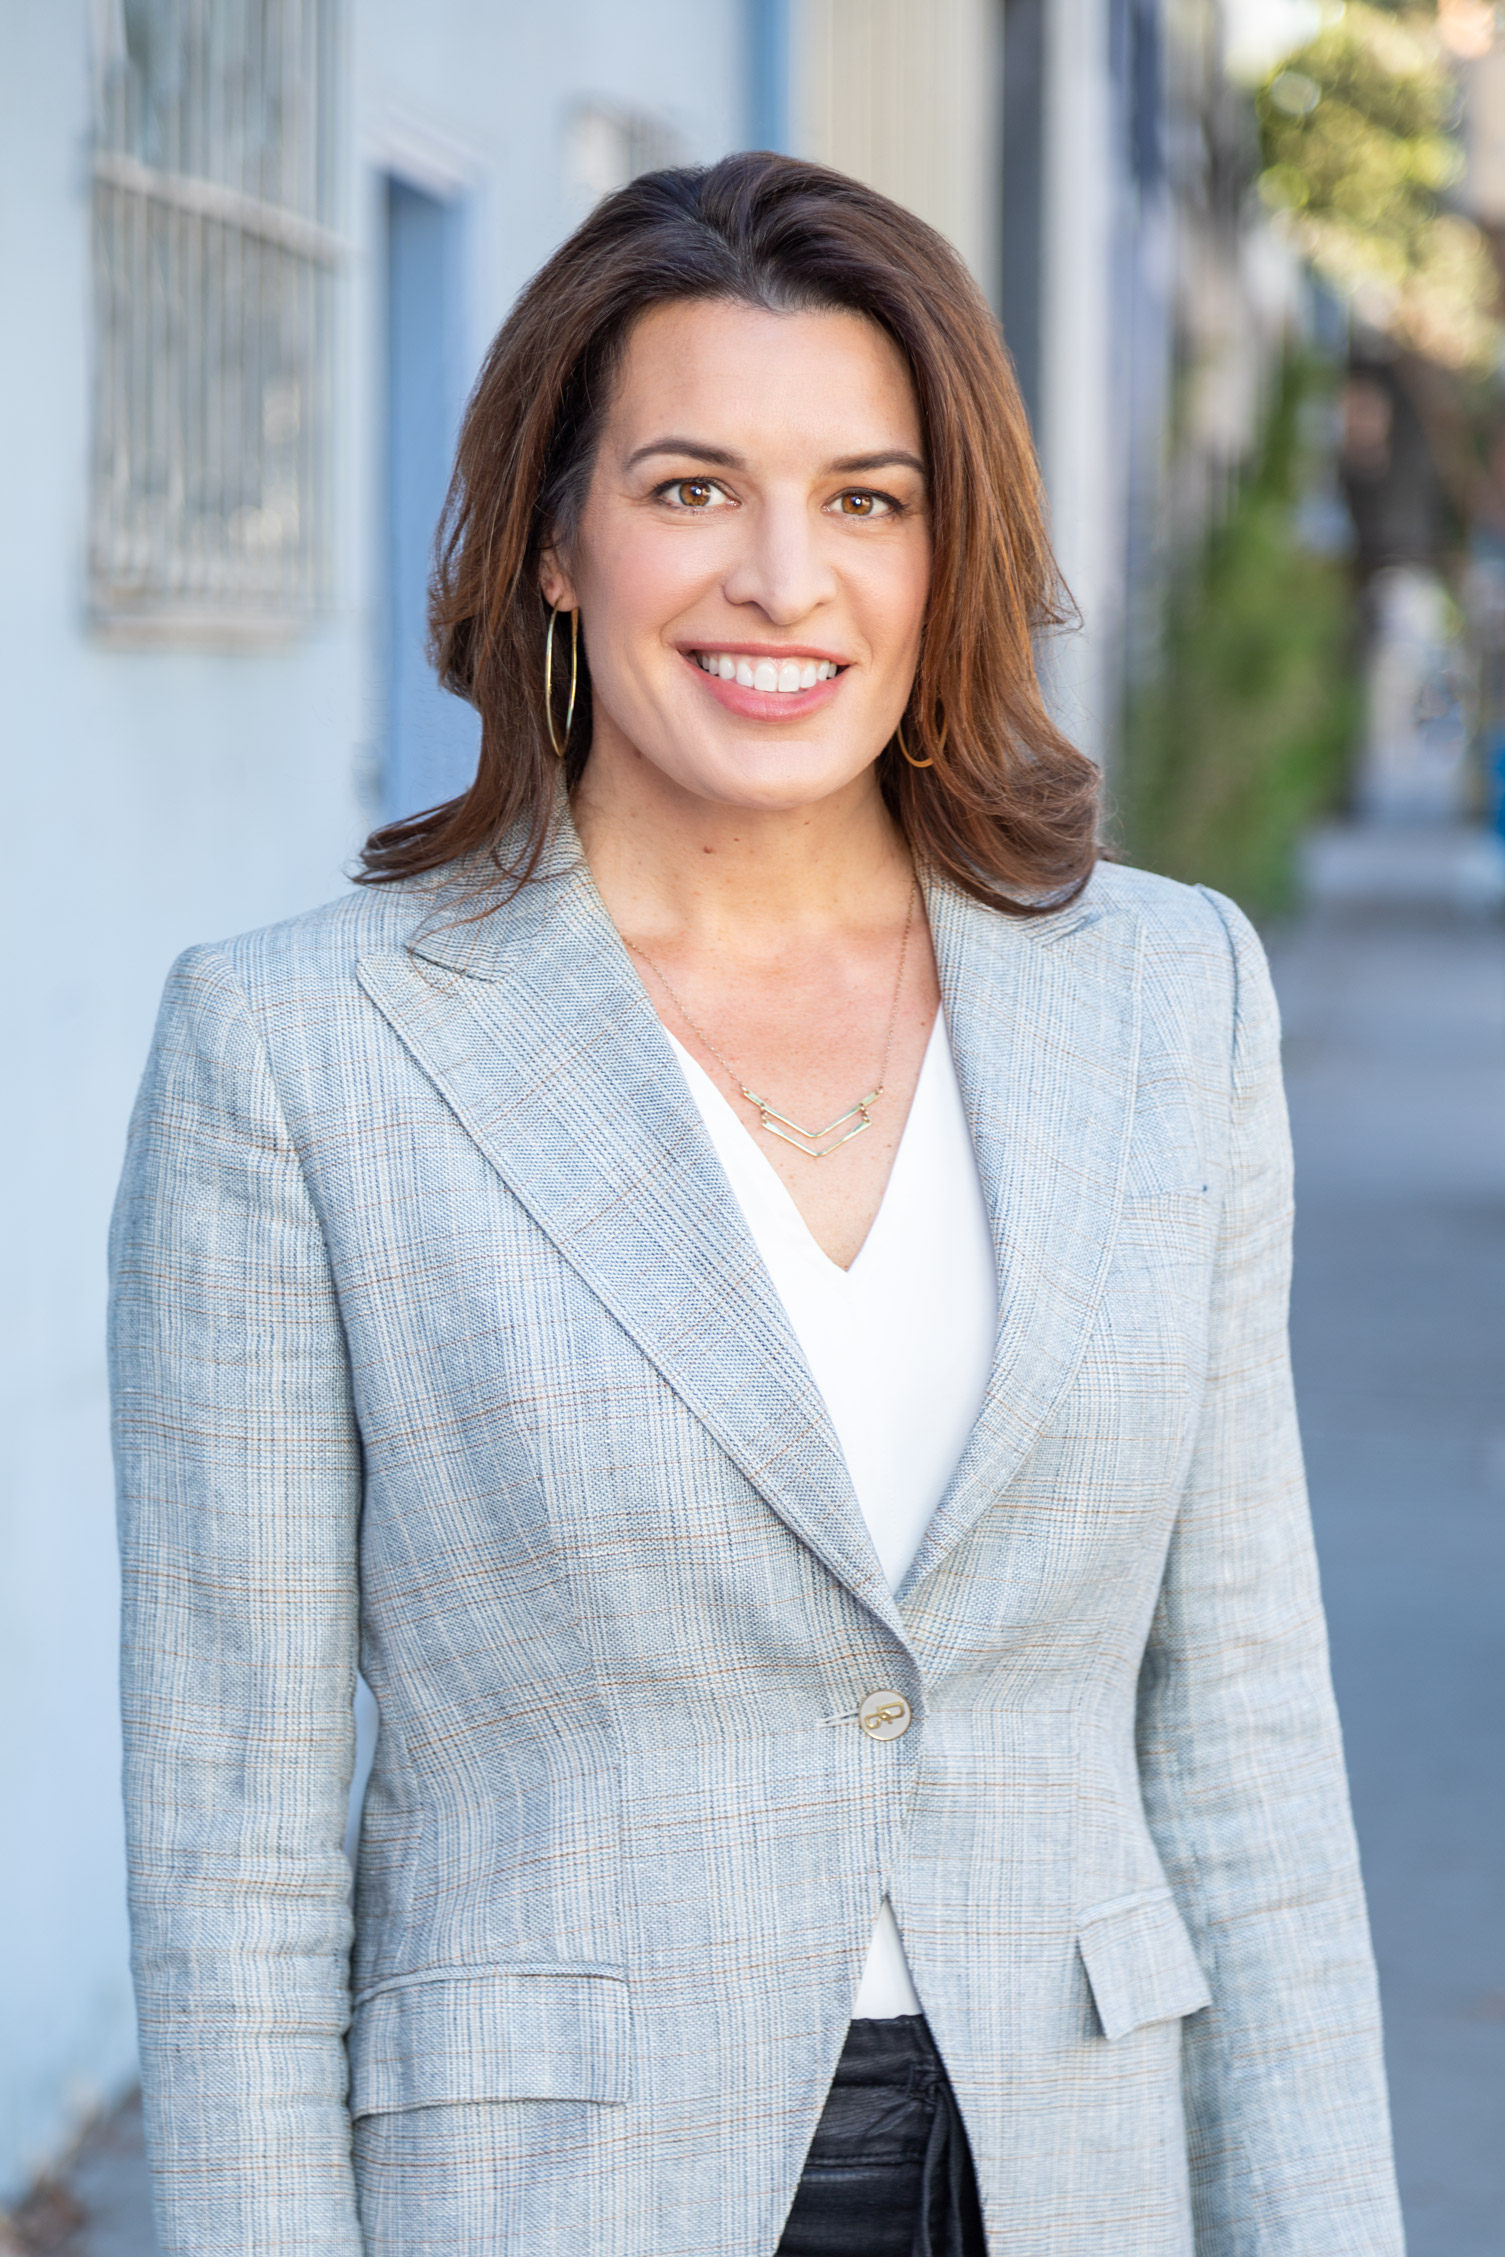 Headshot of Woman in Suit in City